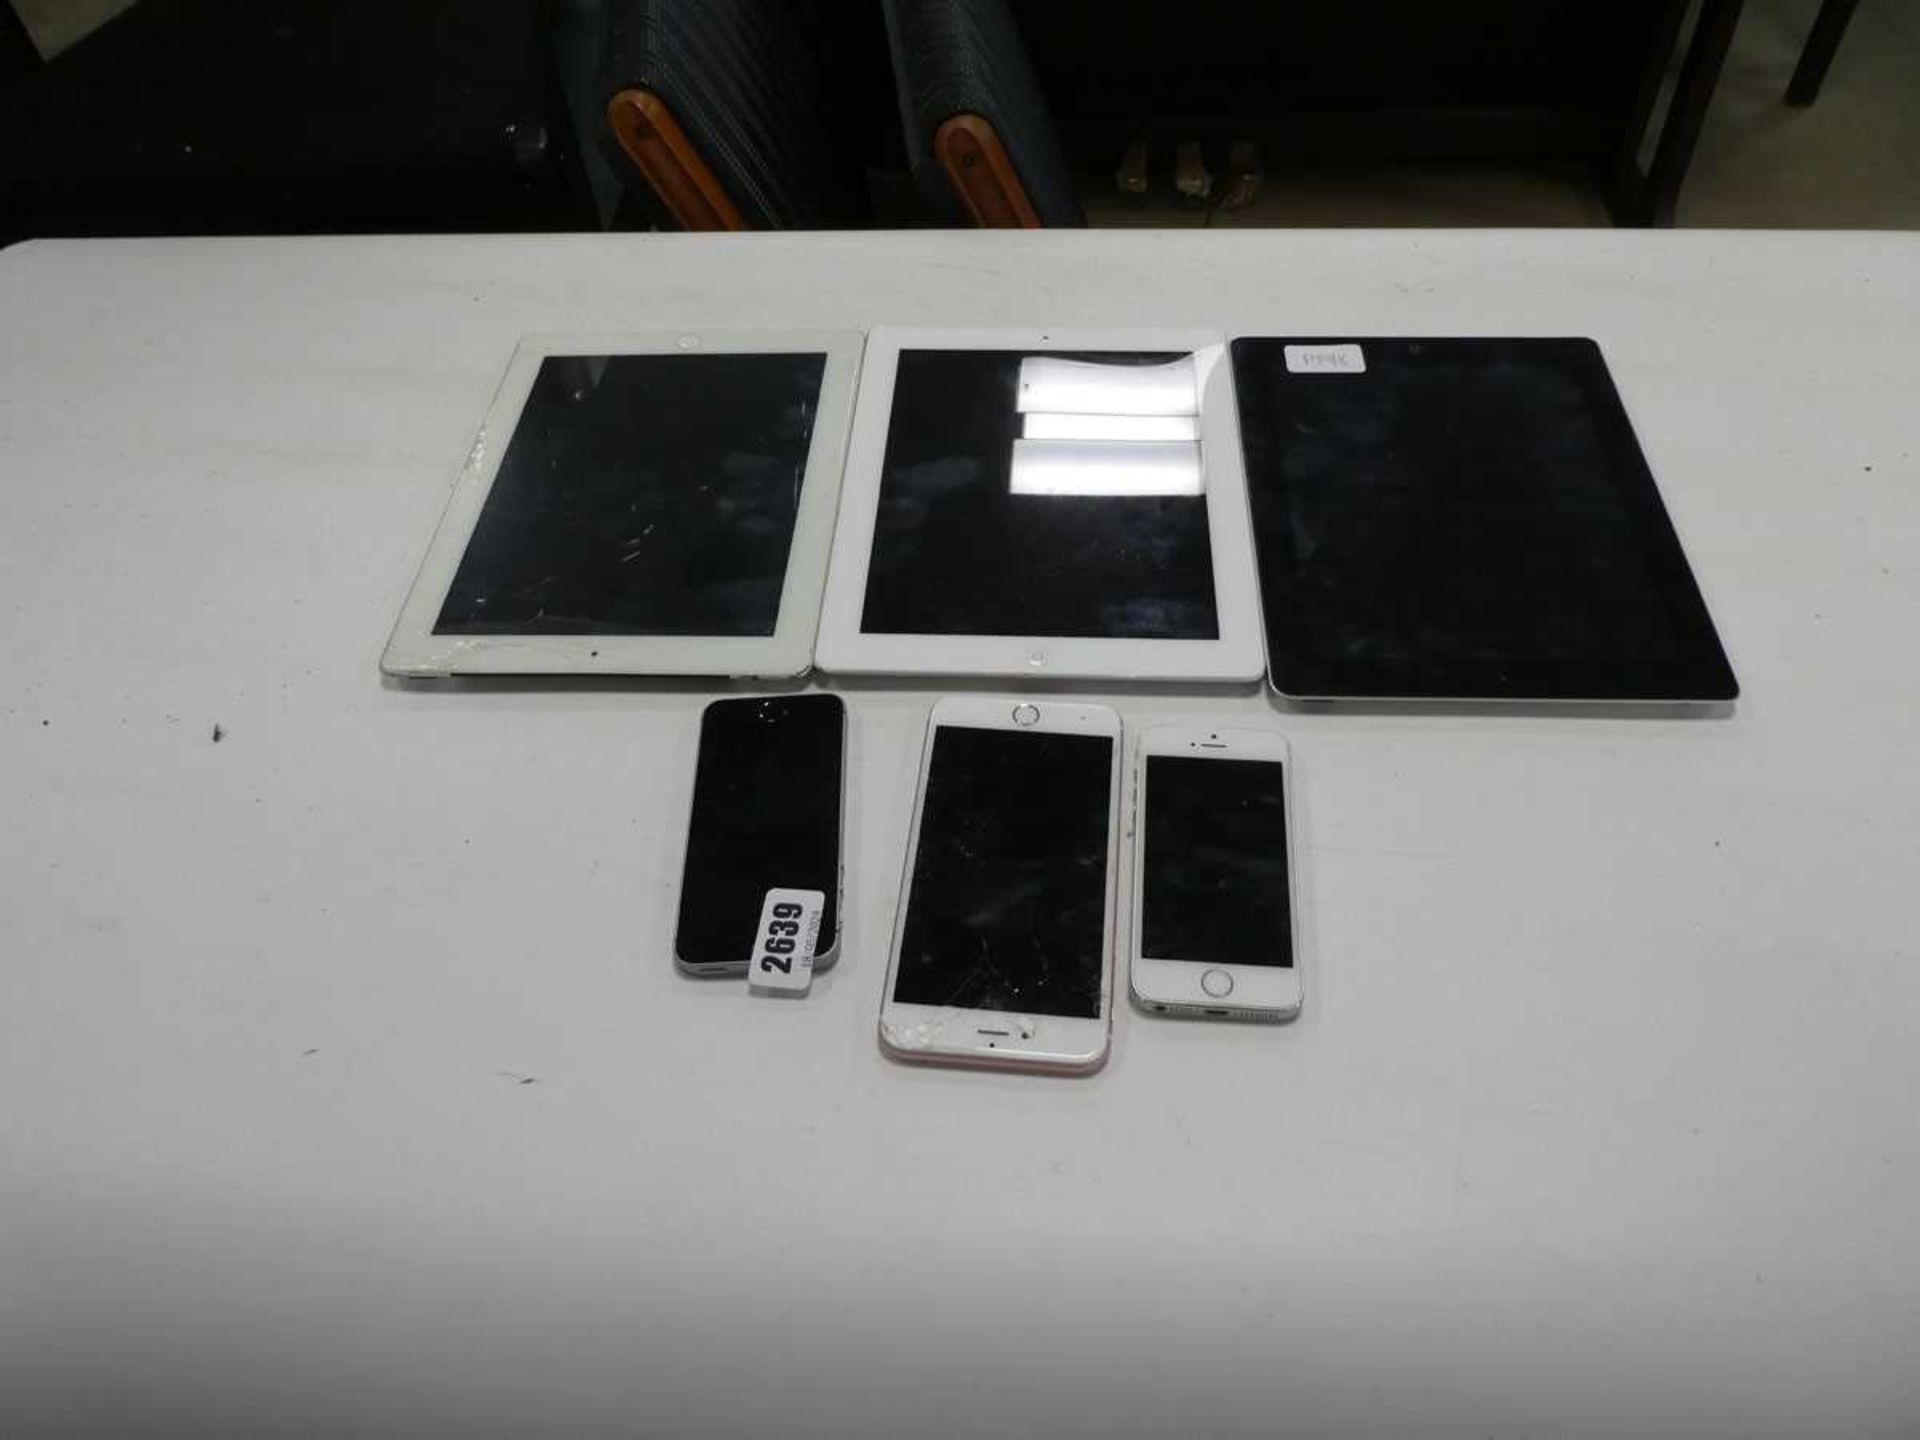 3 tablets and 3 Apple smart phones, for spares and repairs